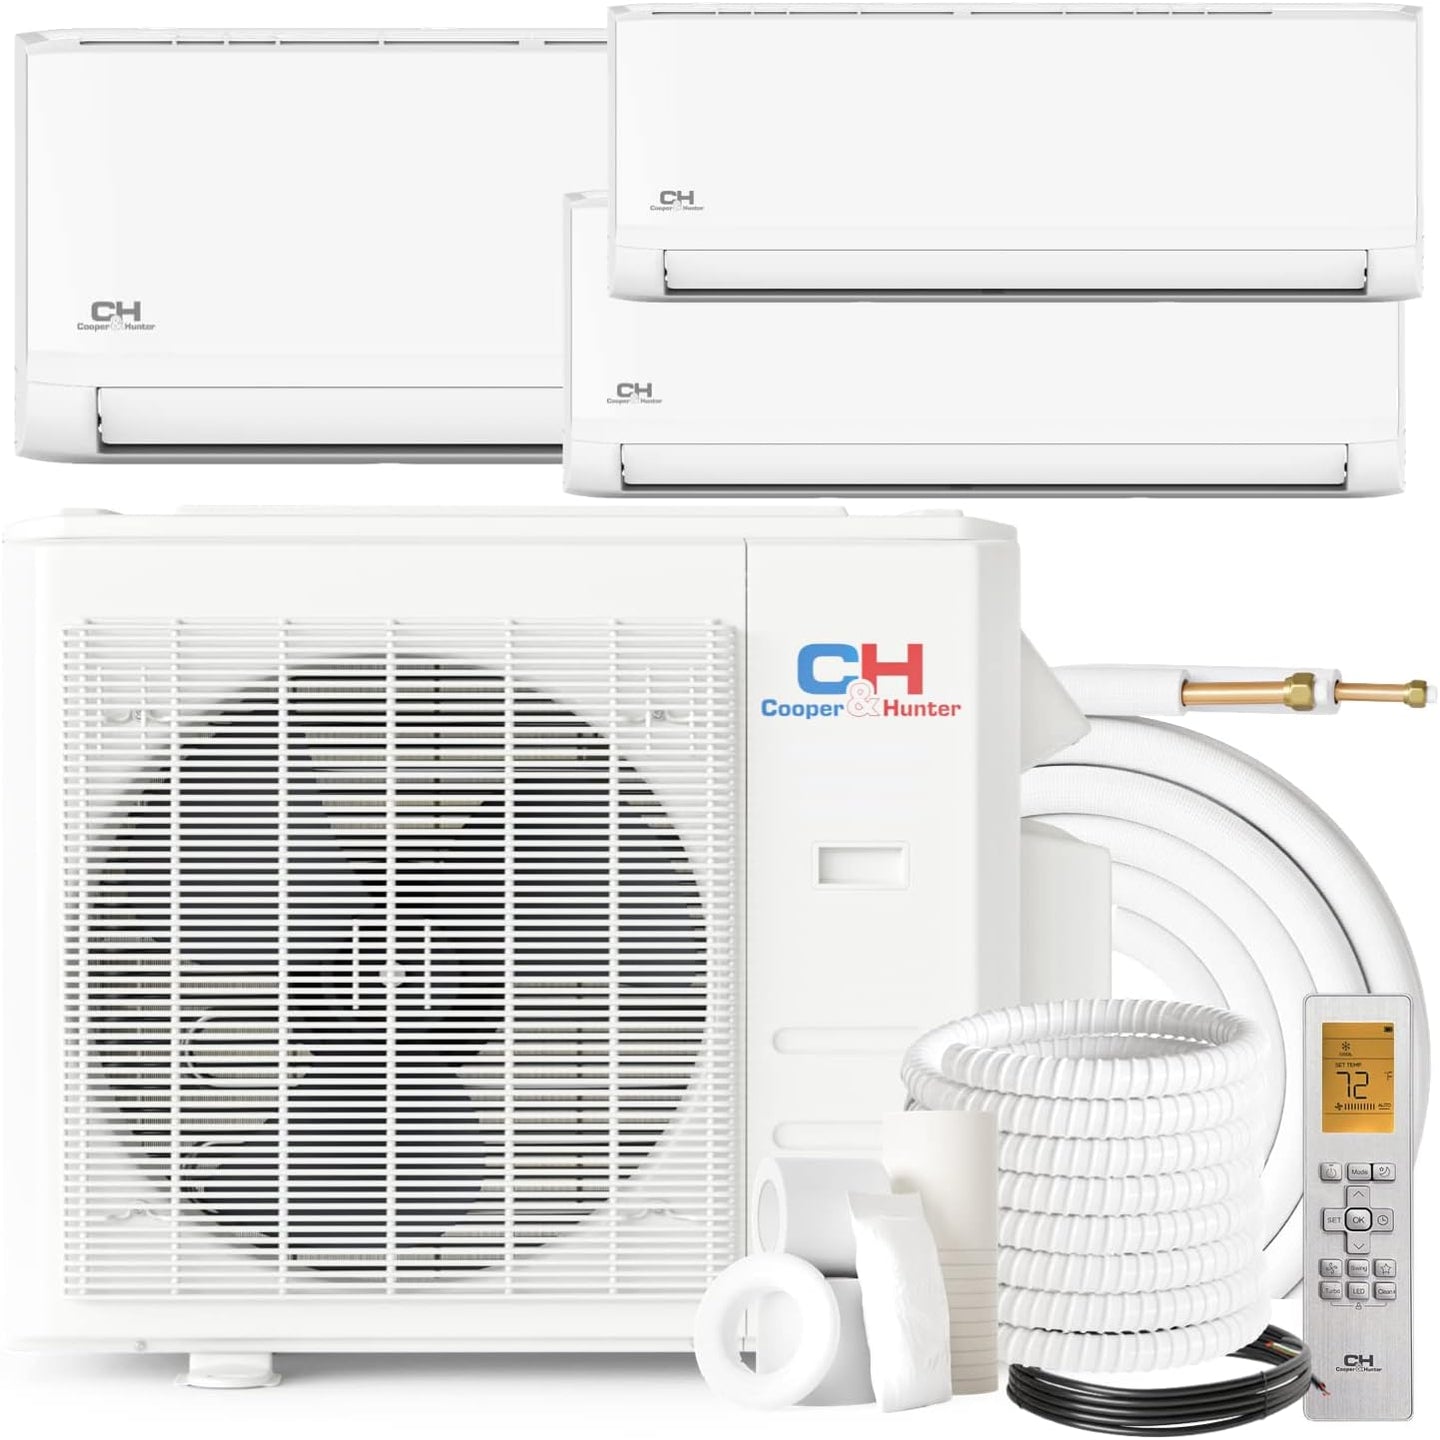 Cooper & Hunter OLIVIA Series Tri 3 Zone 6000 9000 18000 BTU 23.8 SEER Multi Zone Ductless Mini Split Air Conditioner and Heater Full Set with 25ft Installation Kits